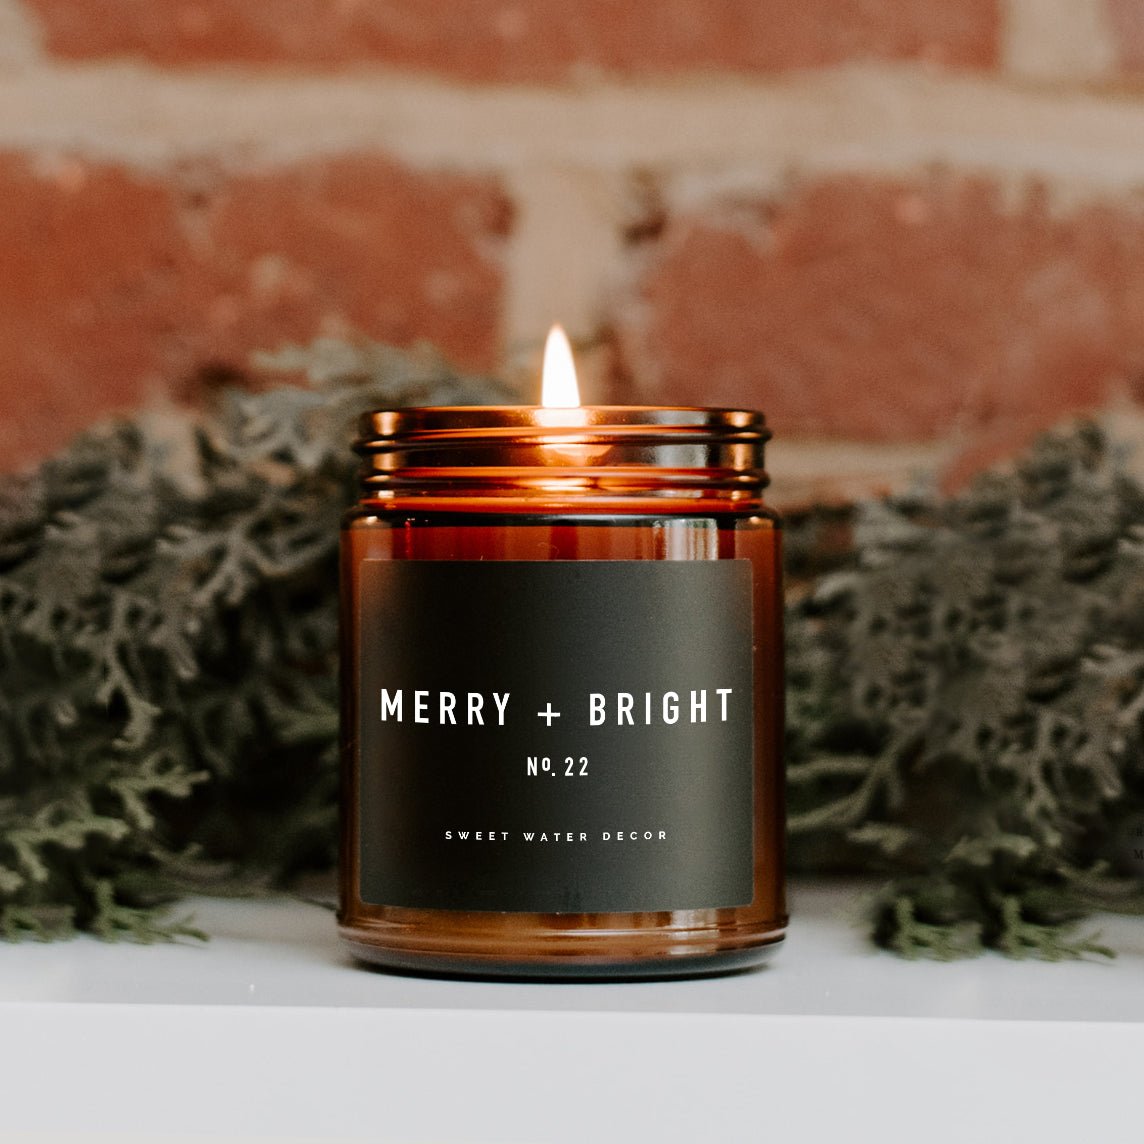 Sweet Water Decor Merry + Bright Soy Candle - Amber Jar - 9 oz - lily & onyx